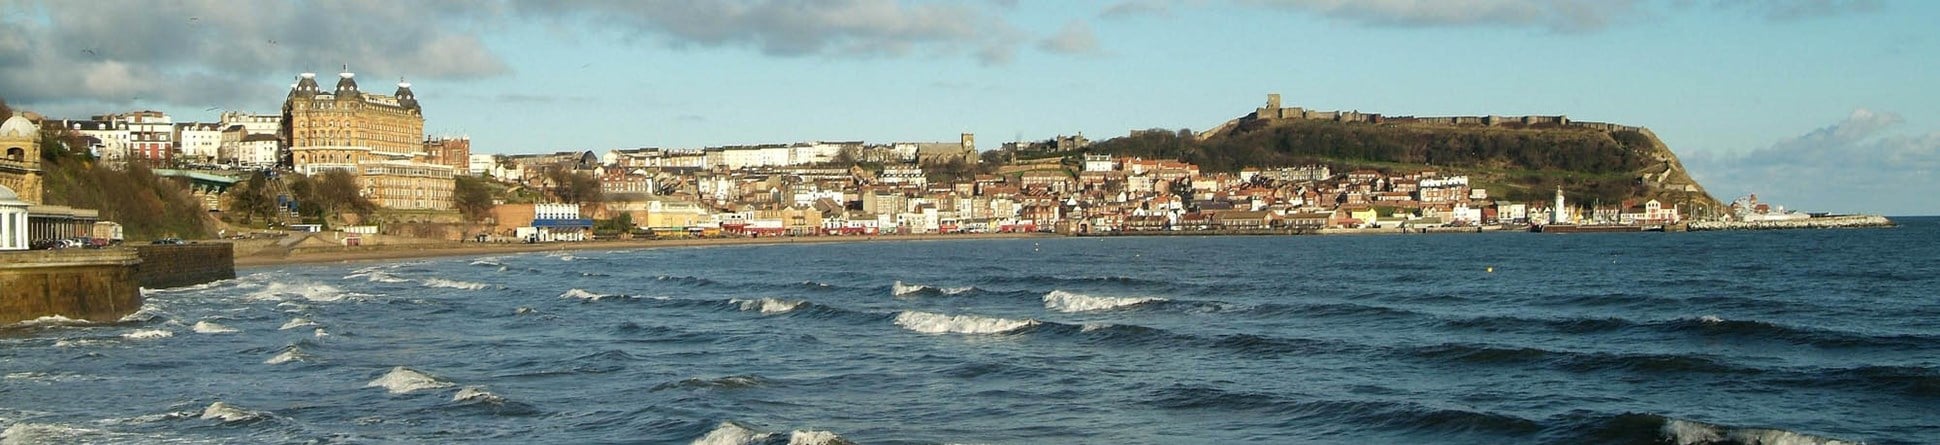 View across the water to the beach and the Grand Hotel, Scarborough, North Yorkshire